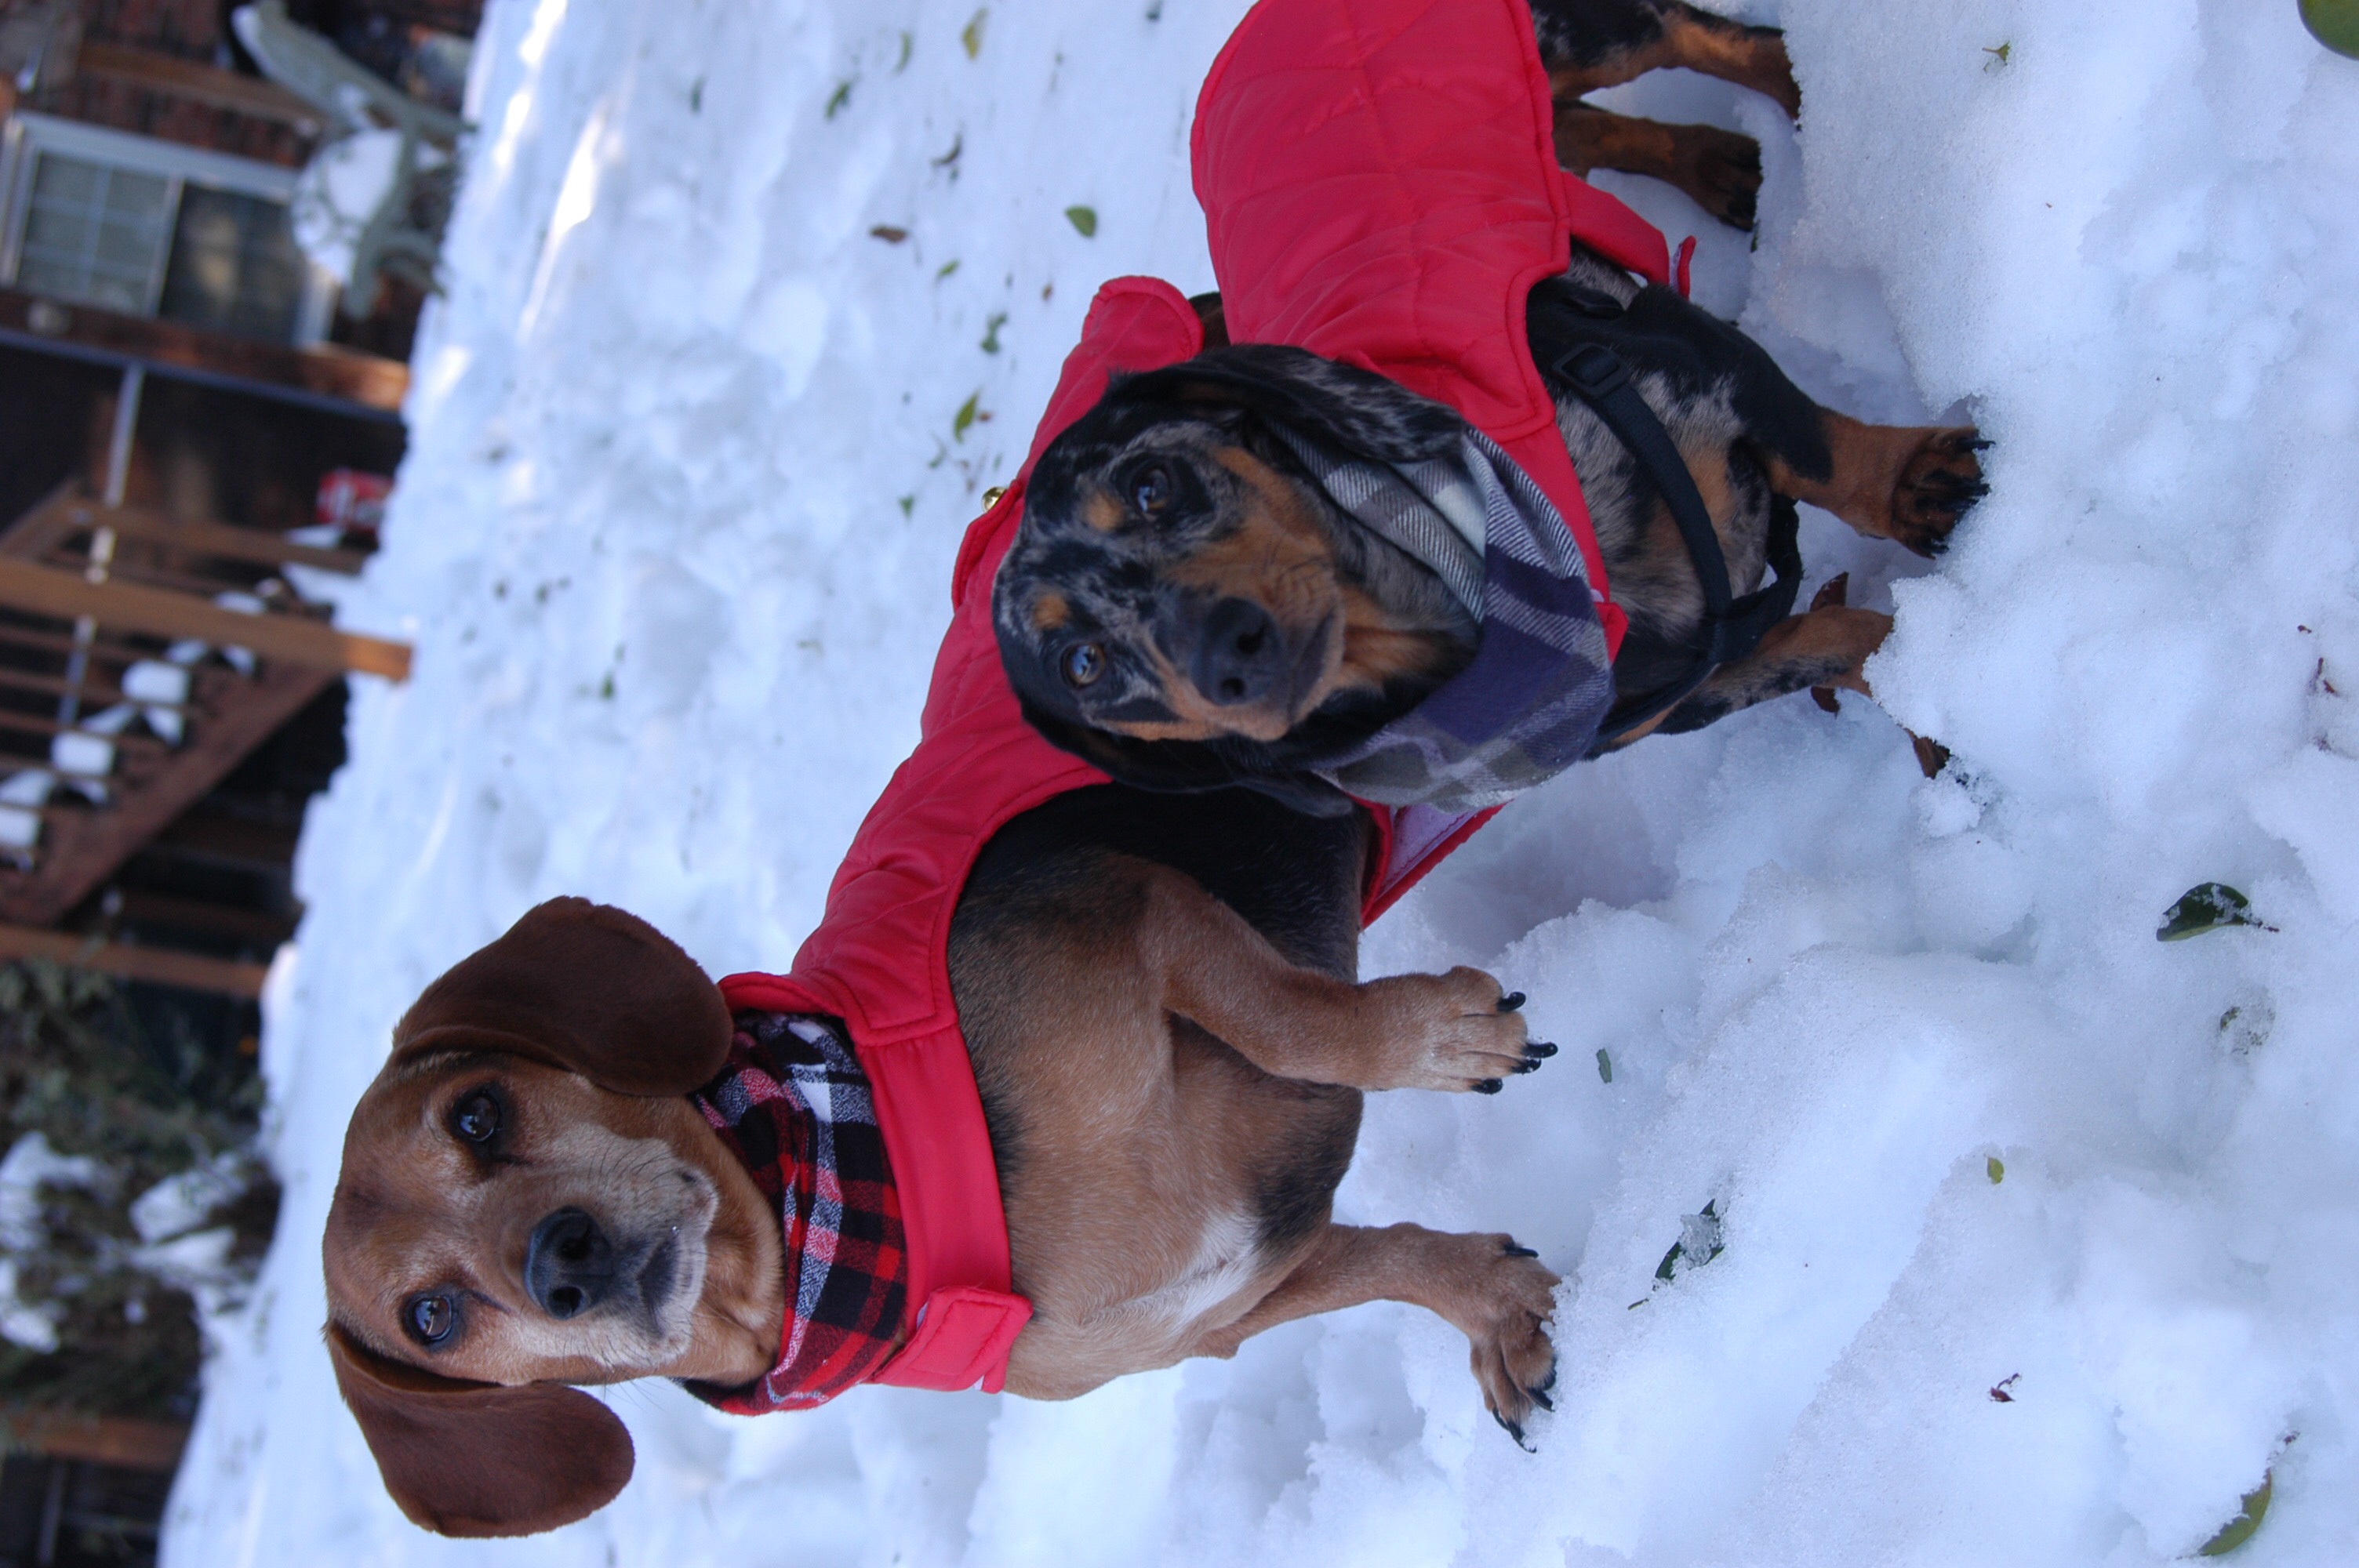 Deacon and Otis standing in the snow